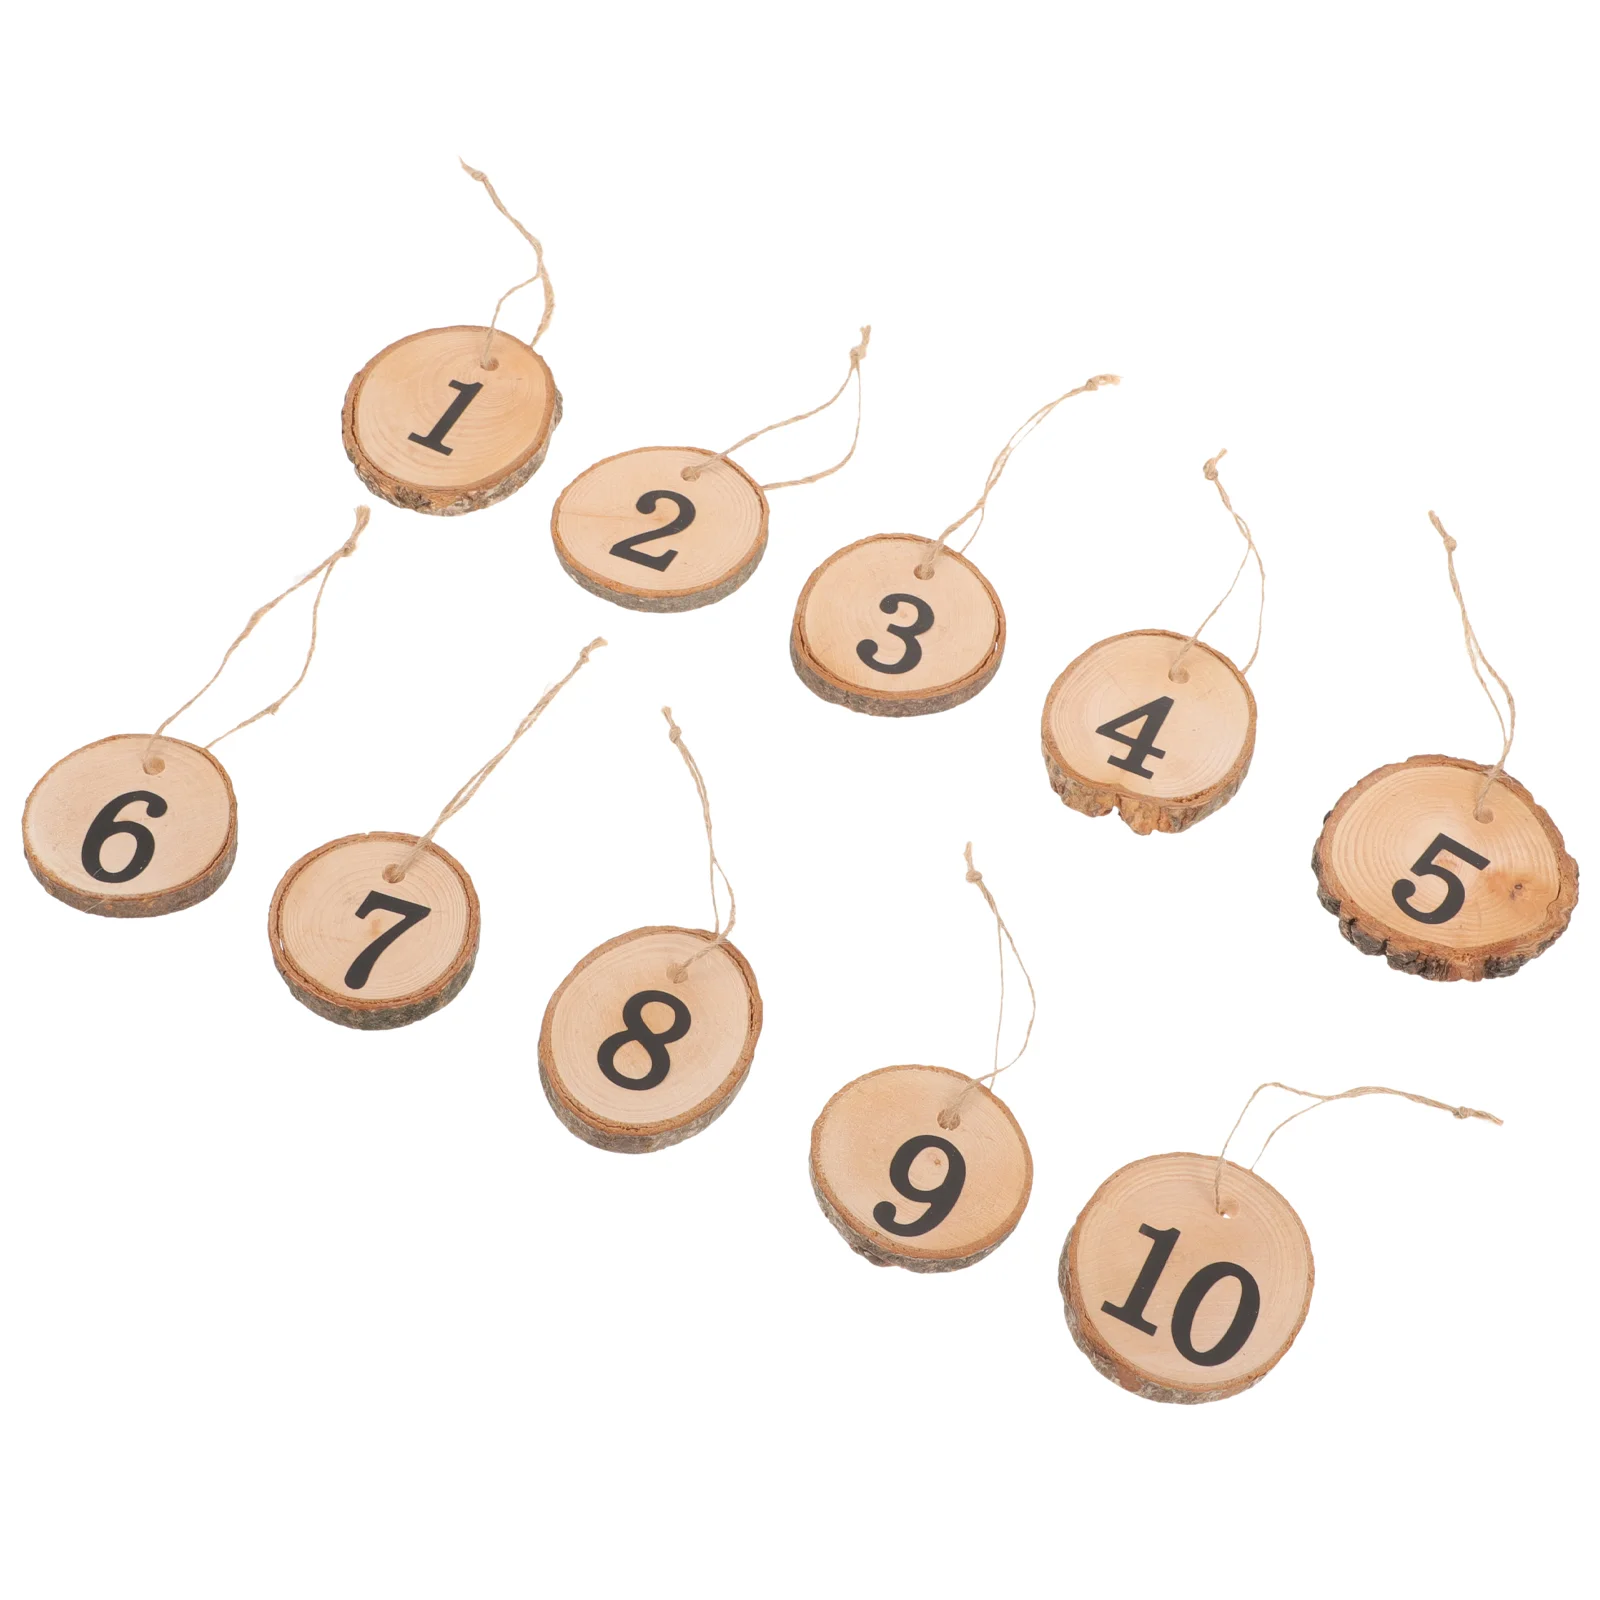 

10 Pcs Table Decor Wooden Slice Numbers Hanging Rural Wedding Tree Centerpieces